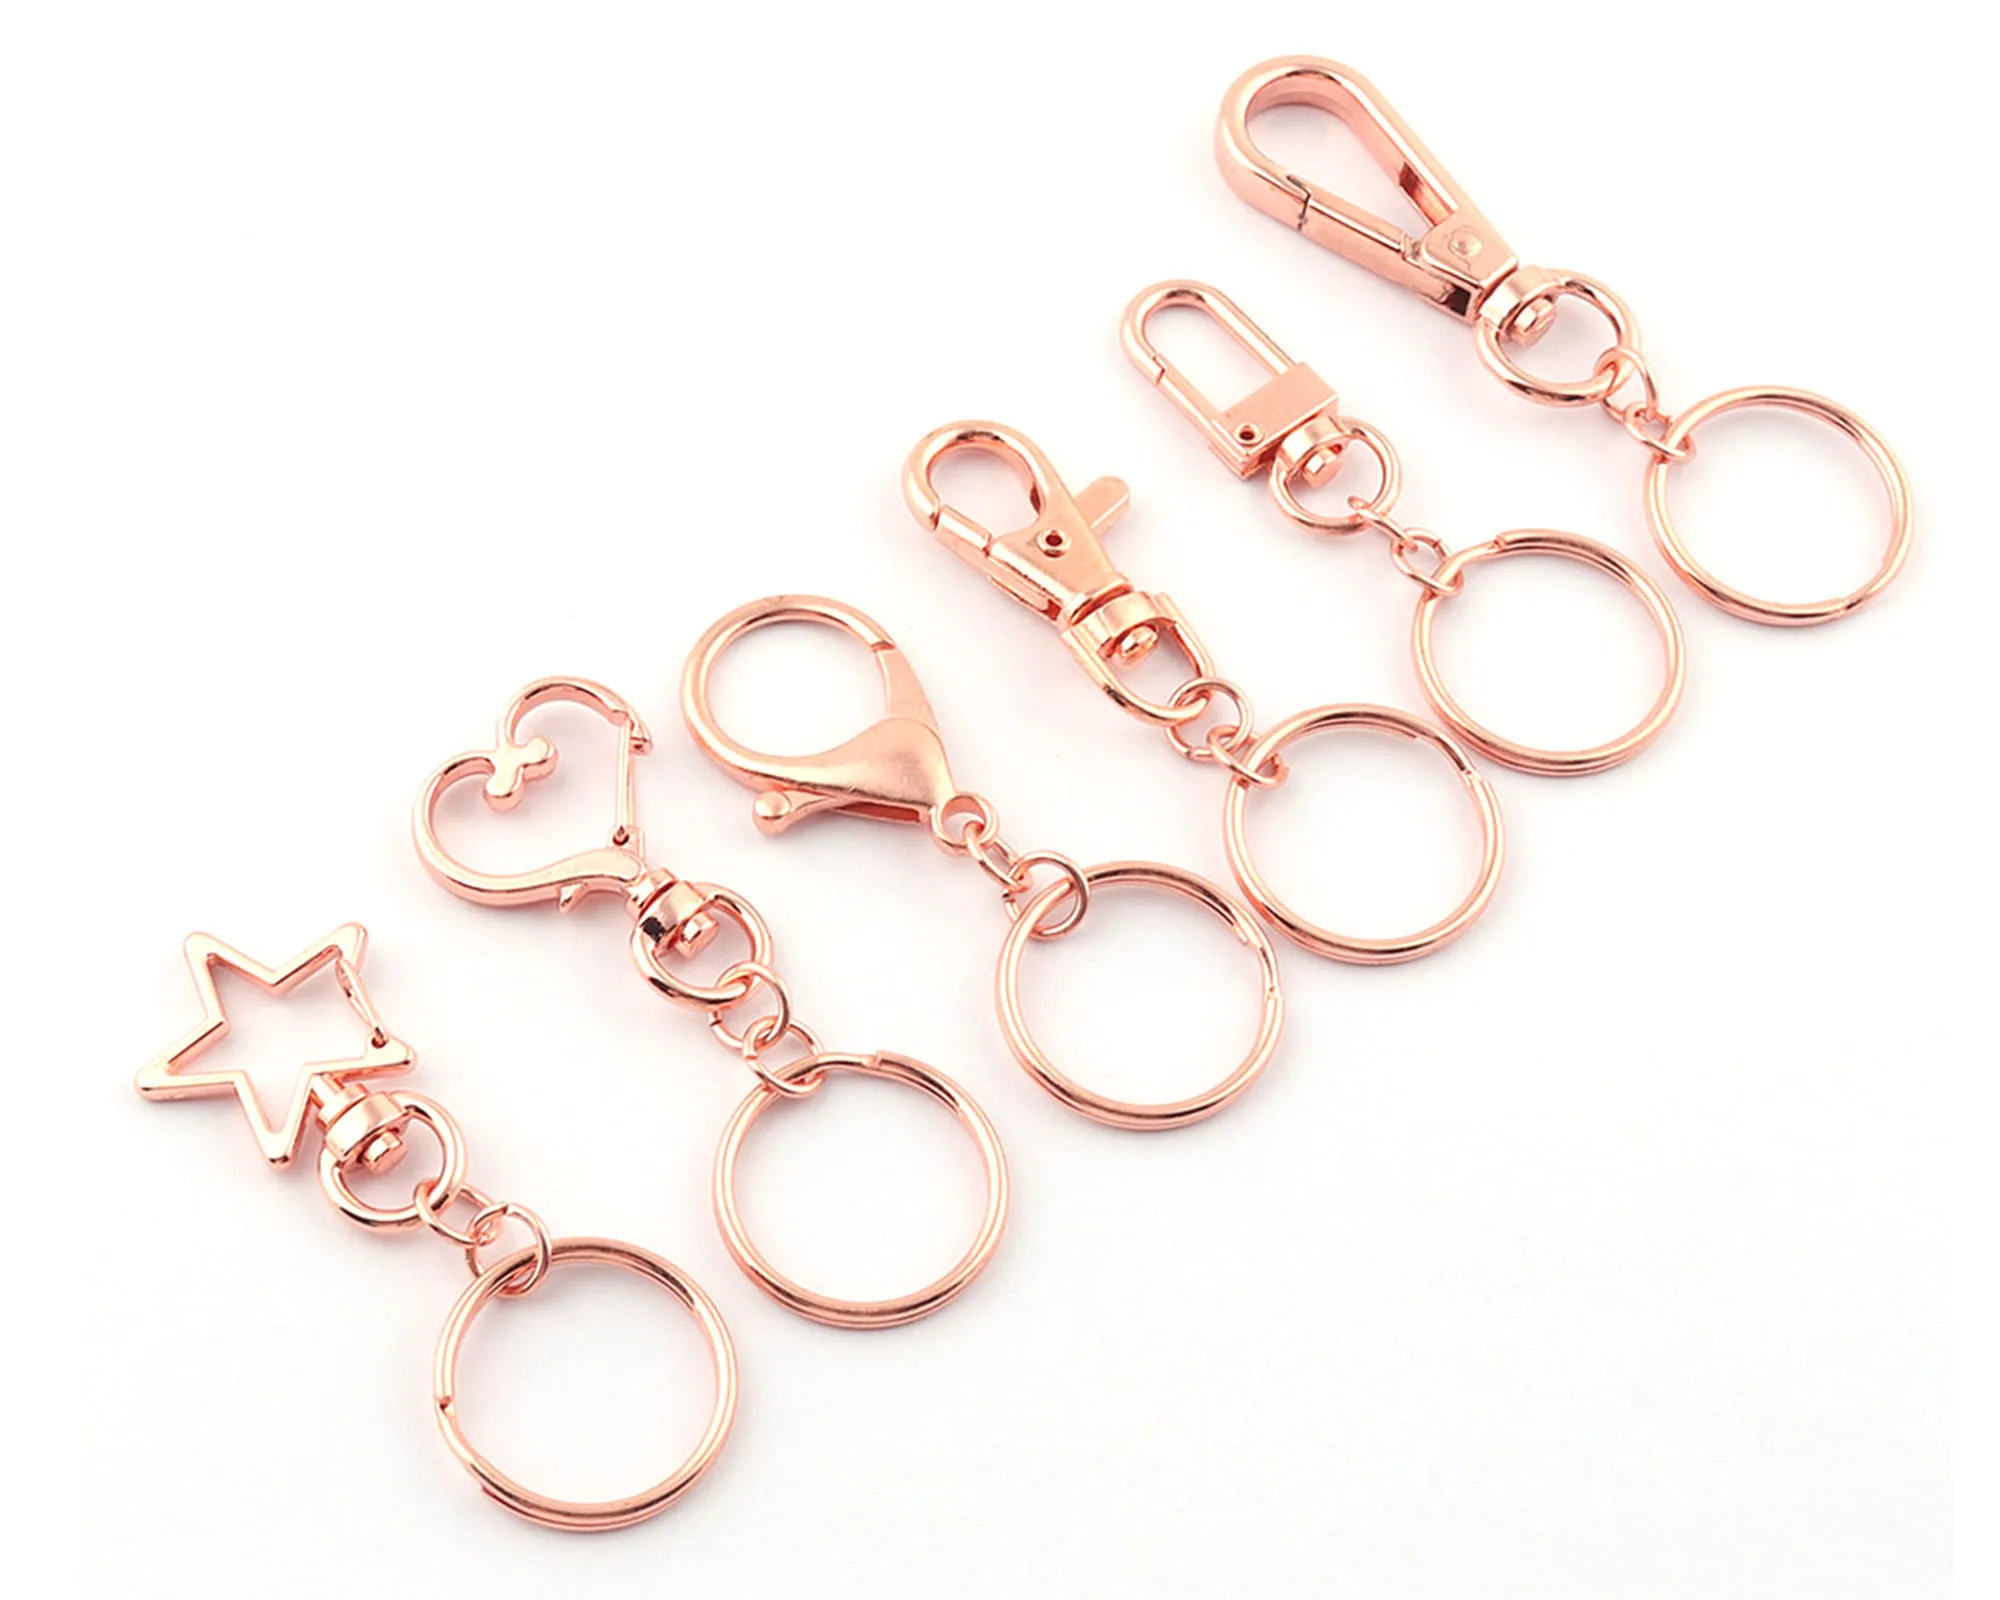 

Rose Gold Swivel Clasp Trigger Clip Snap Hooks Lobster Claws Purse Hardware Supply DIY Making Key Ring Webbing Backpack 6Pcs